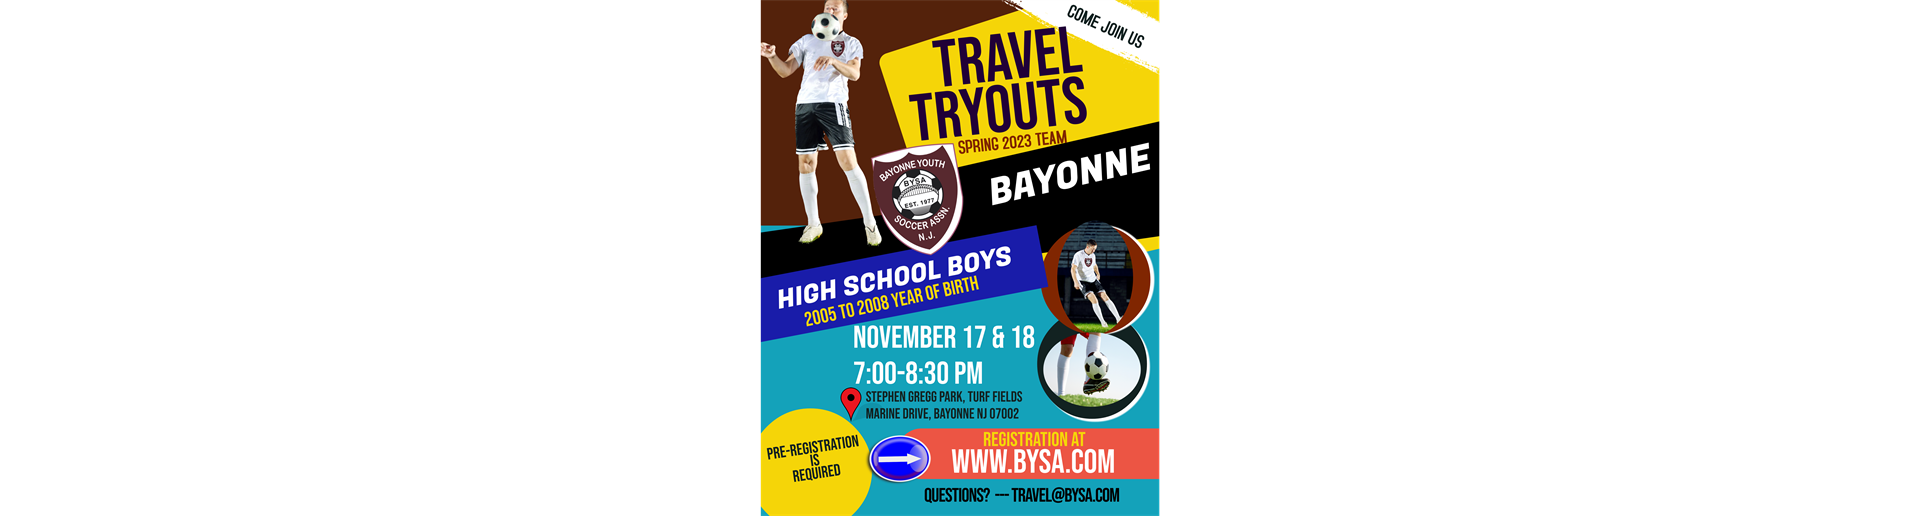 Travel Tryouts for high school age boys